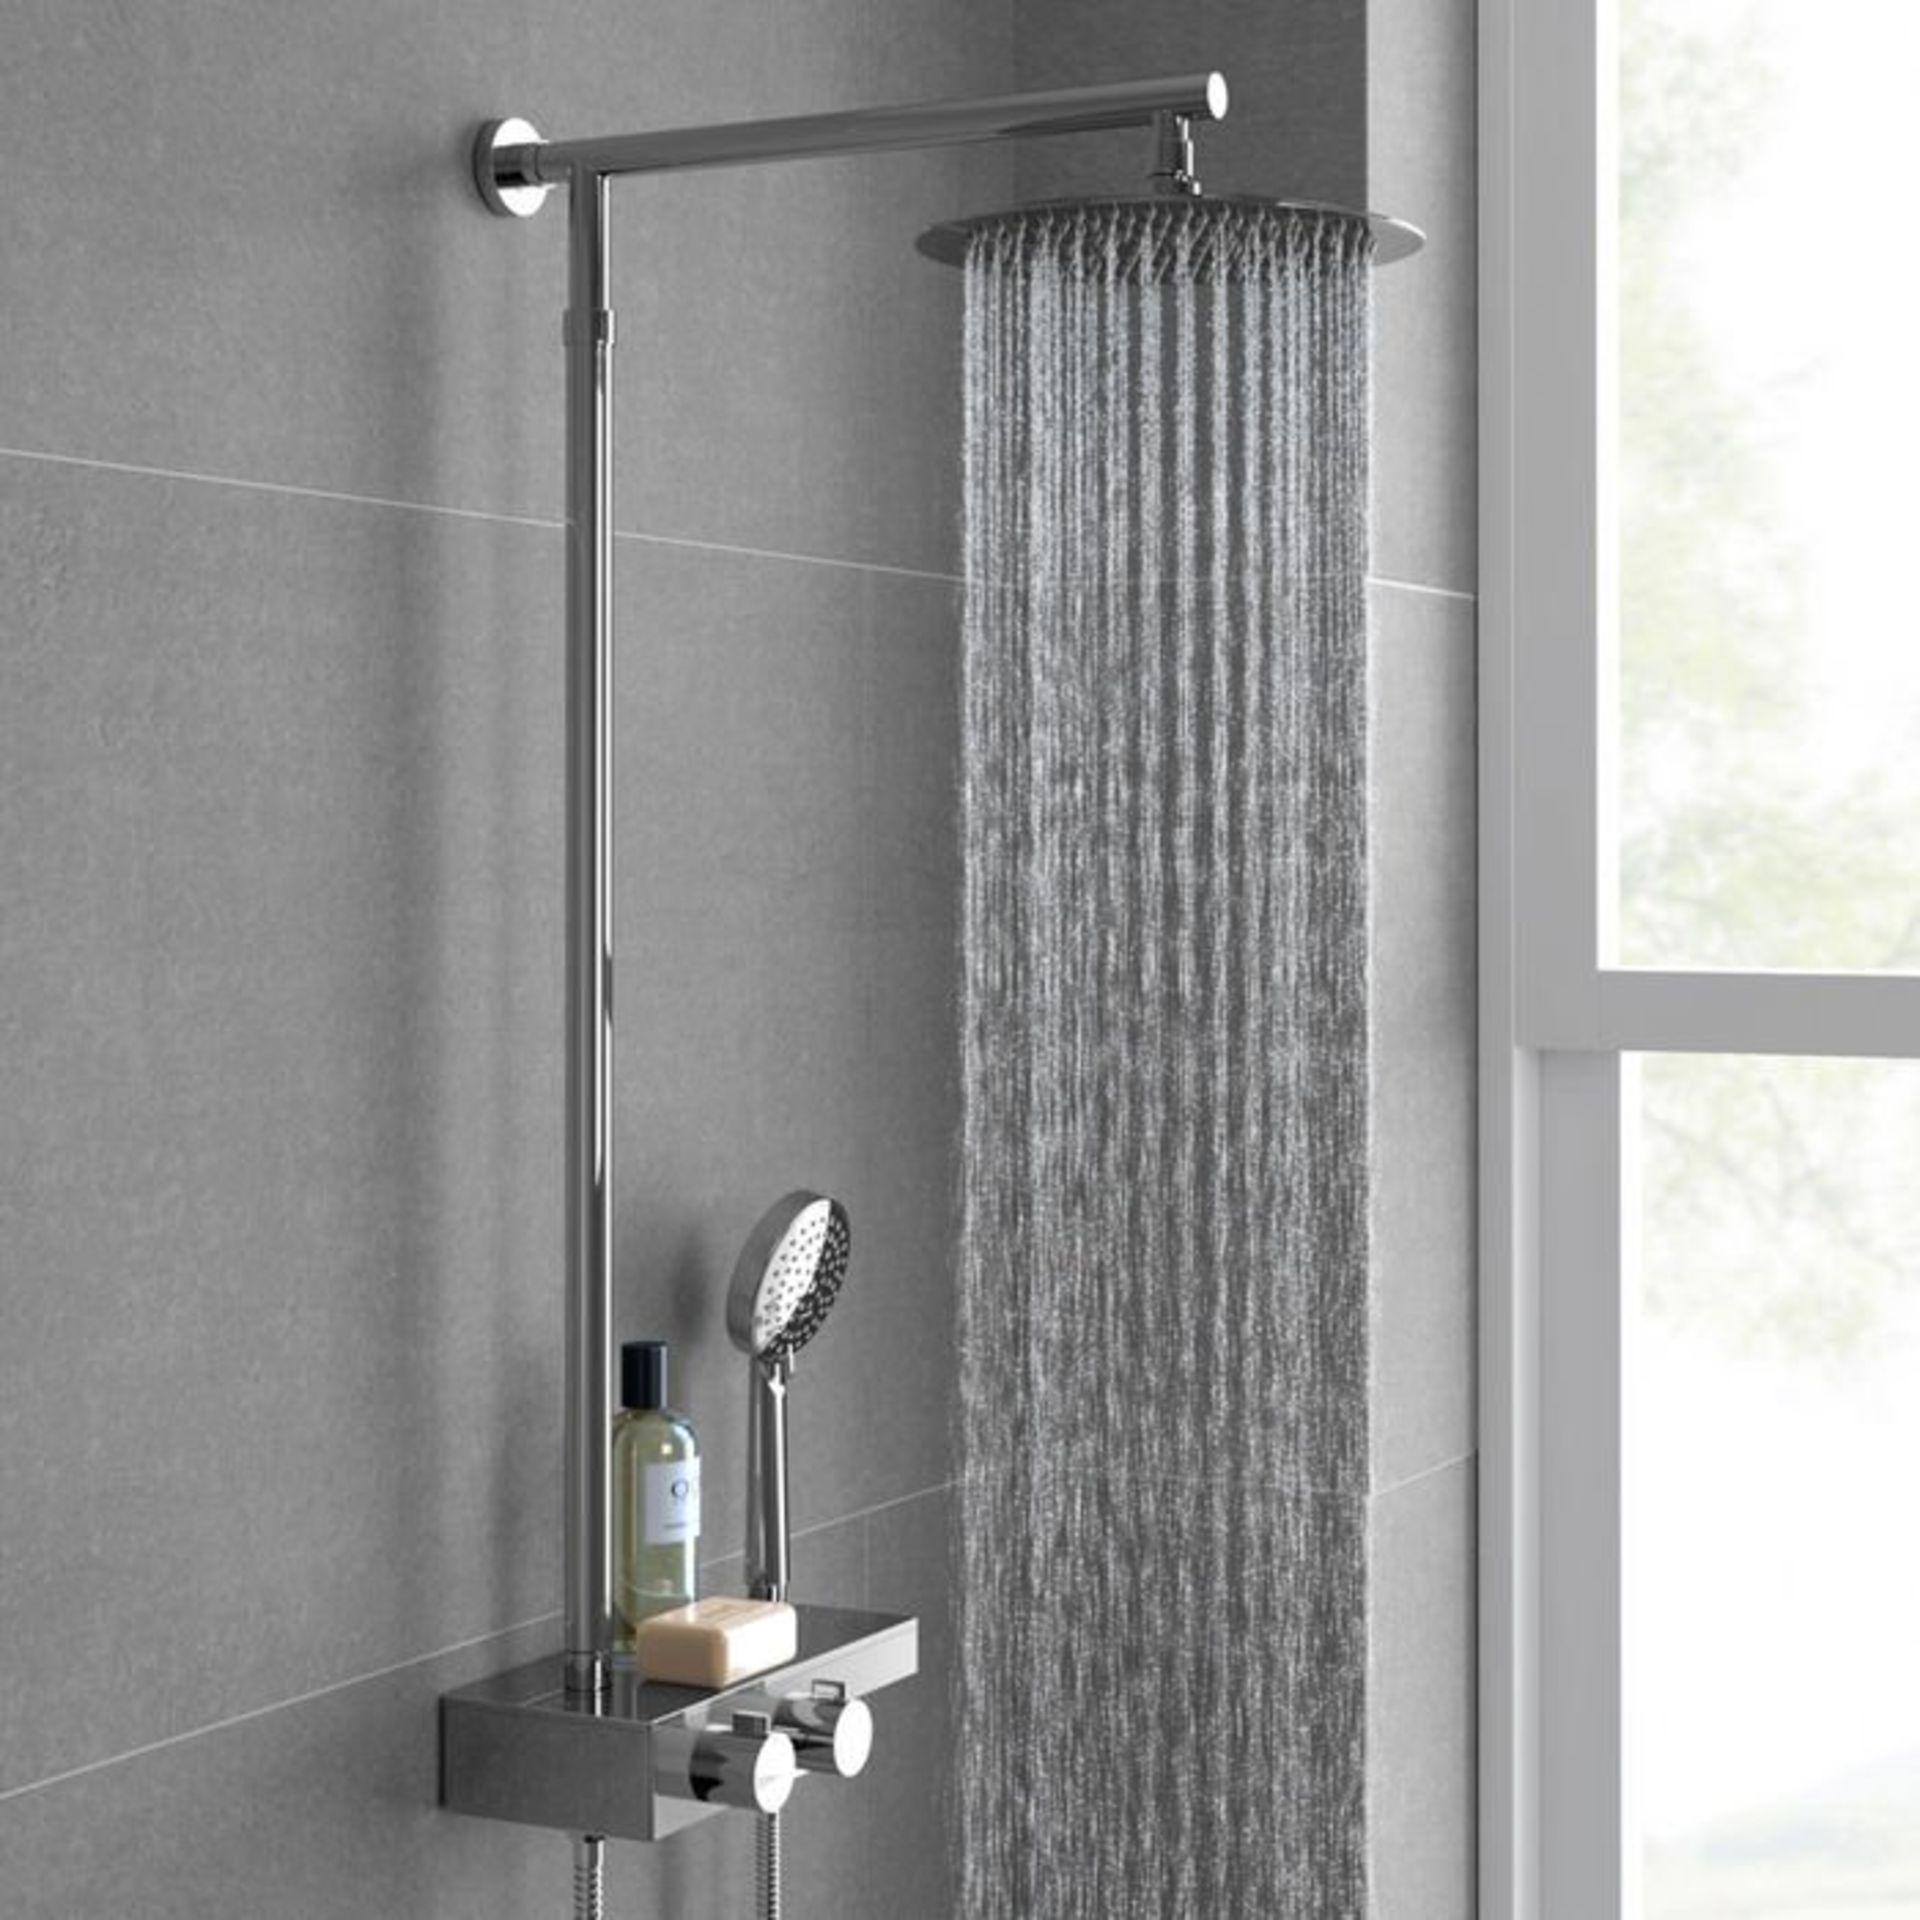 (S41) Round Exposed Thermostatic Mixer Shower Kit & Large Head. Cool to touch shower for